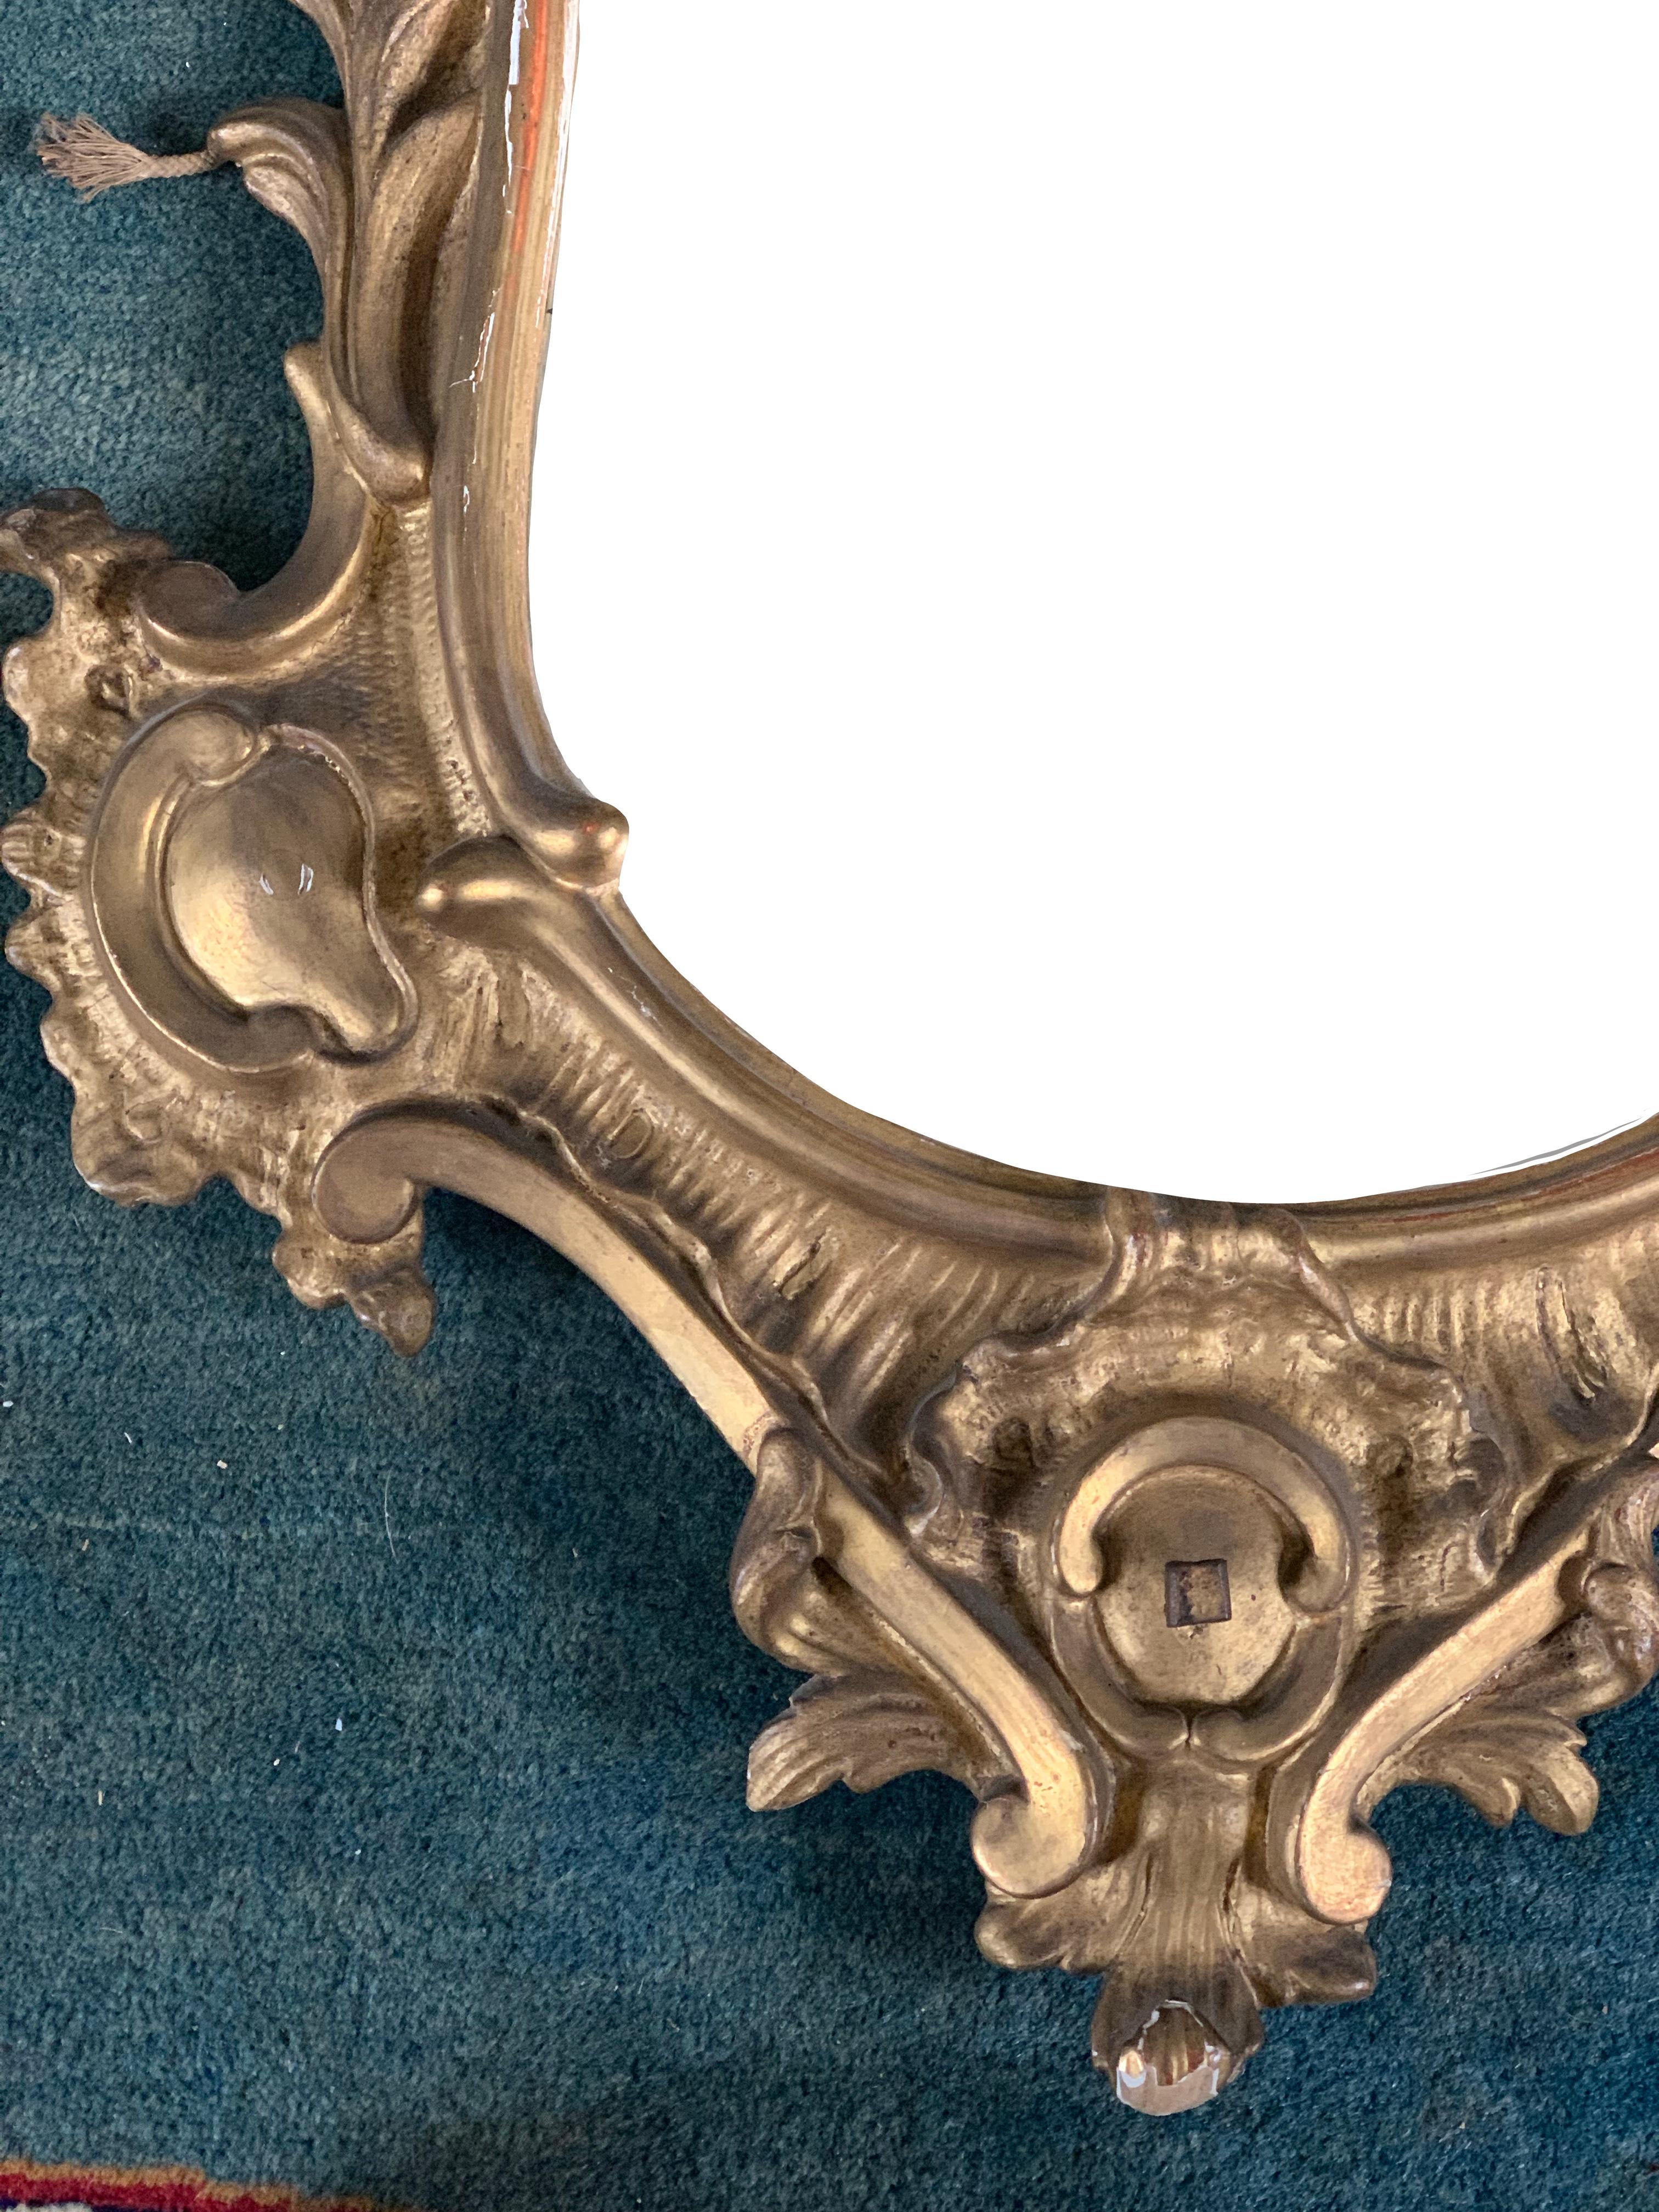 Very beautiful mirror, Regency style, a transitional style between the Louis XIV and Louis XV styles. One recognizes this style with its numerous volutes, shells and leaves. A very delicate and elegant mirror in vogue.
 